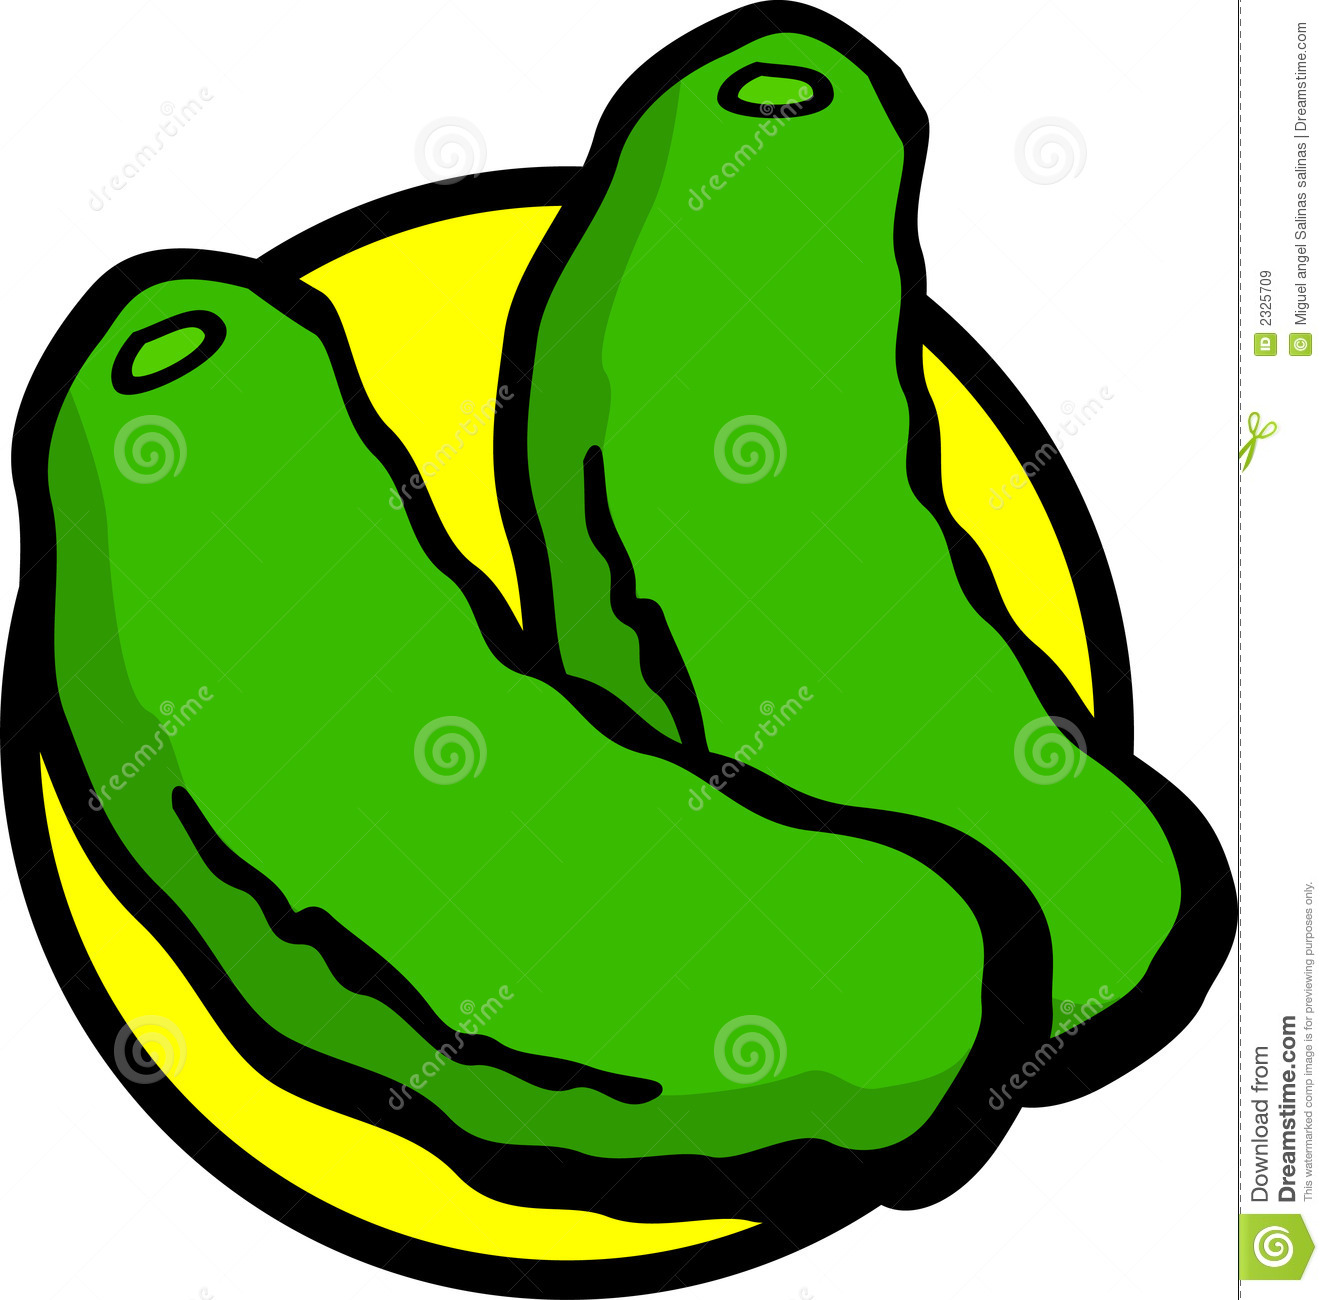 pickle clipart pickle spear